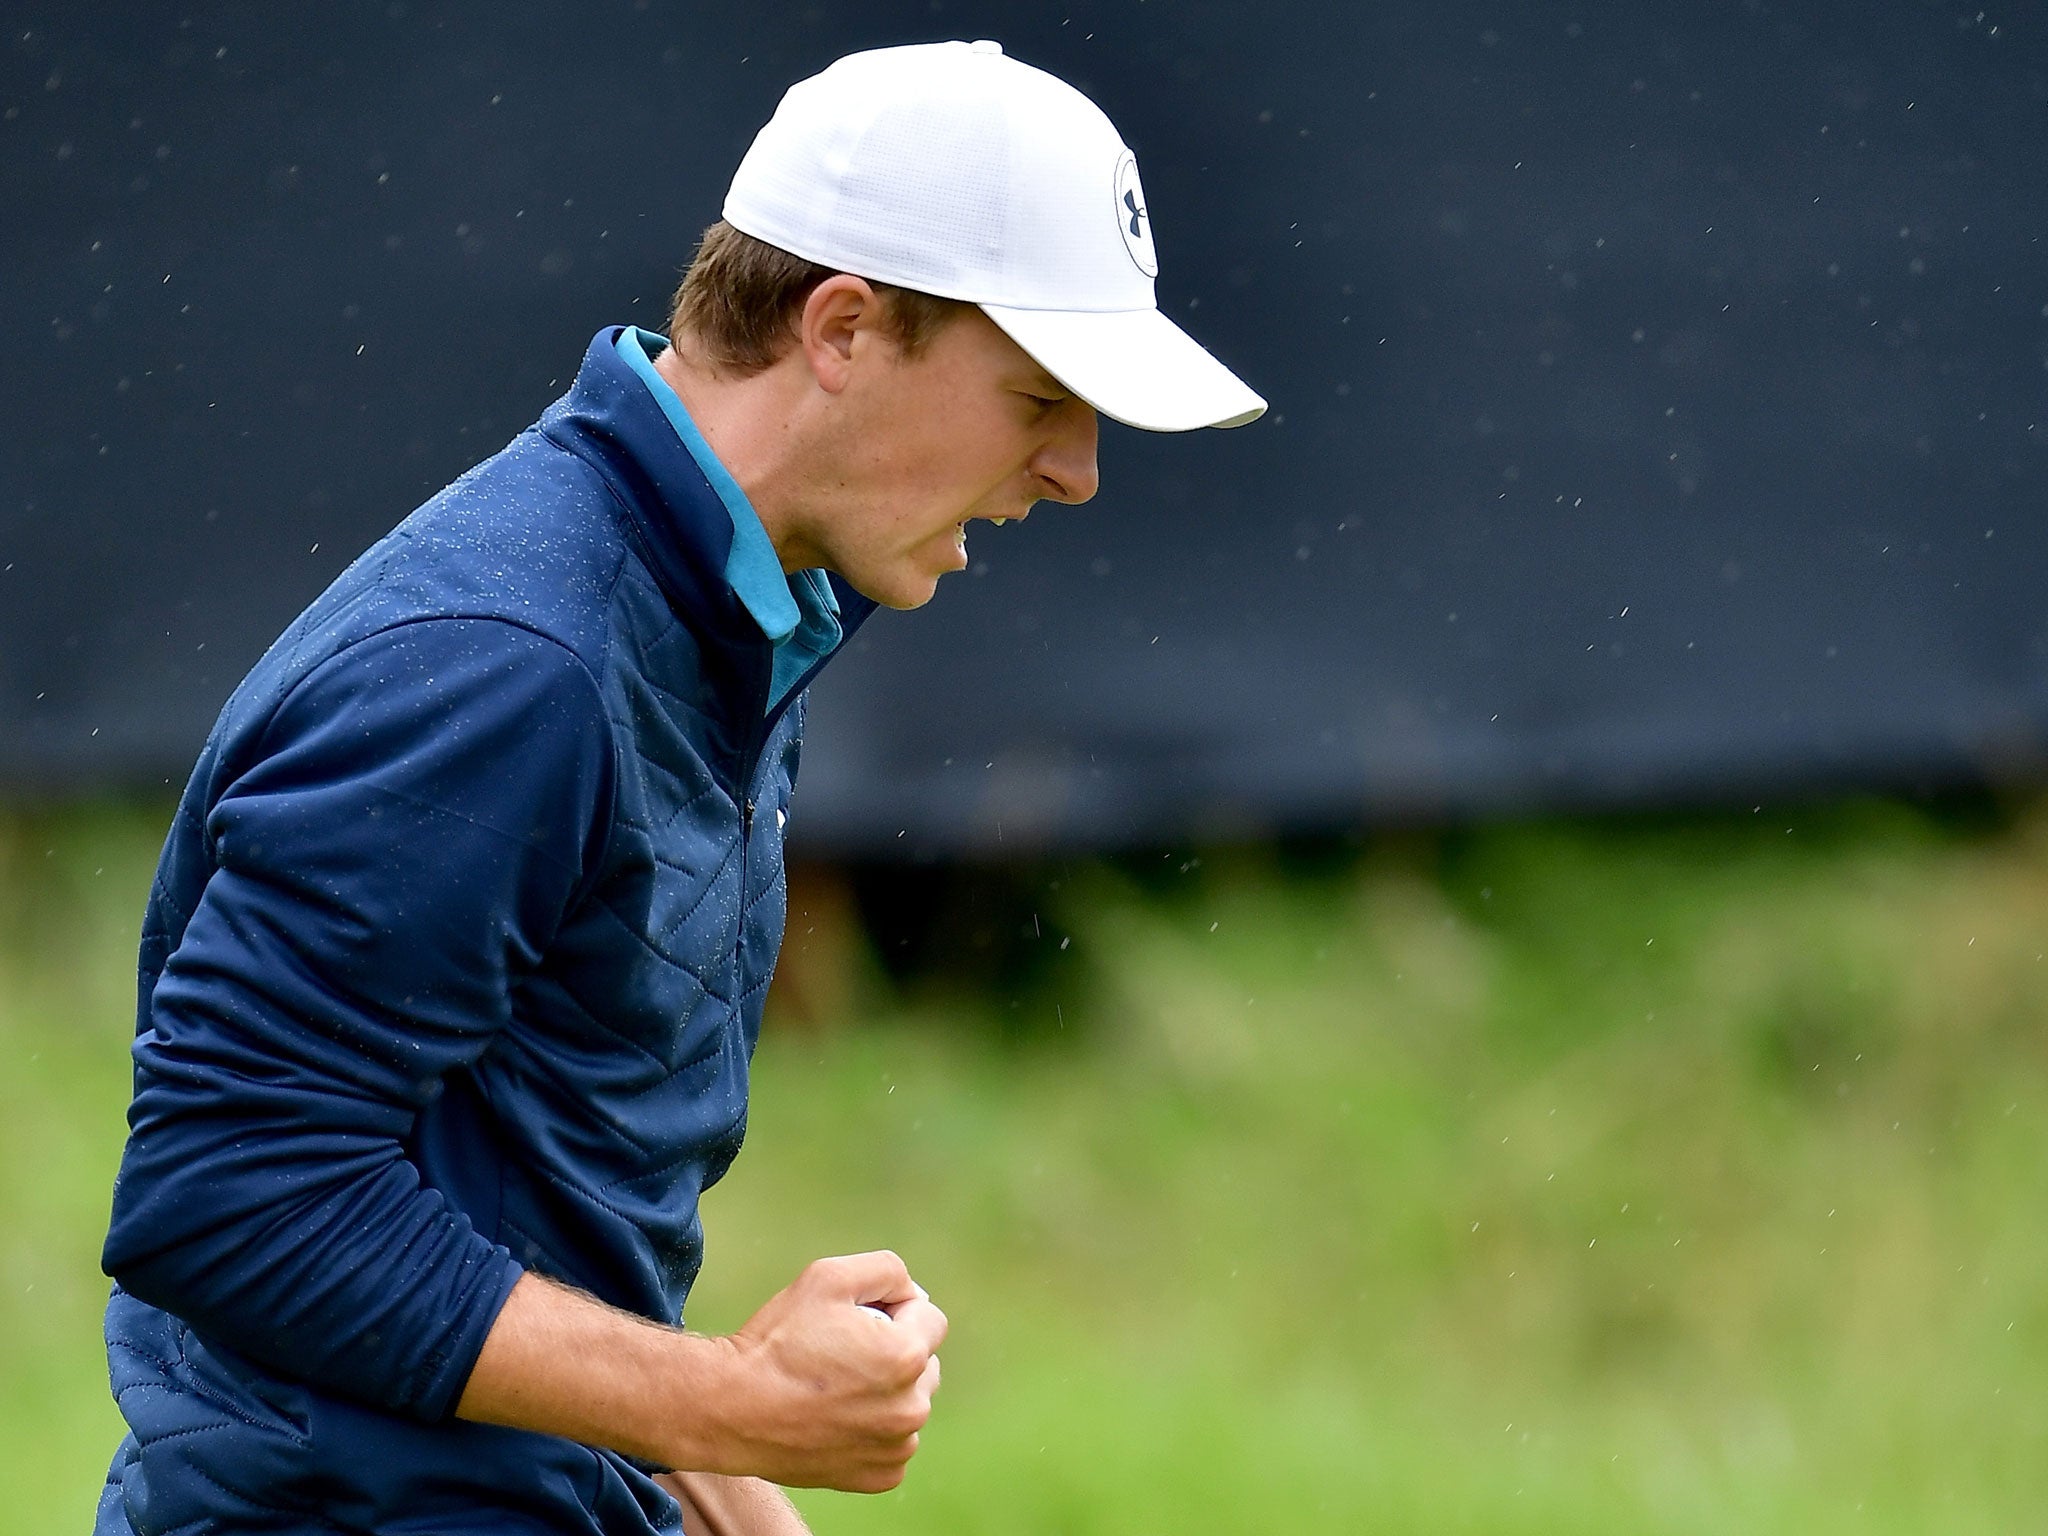 Jordan Spieth fought back after his slip-up on the 13th hole